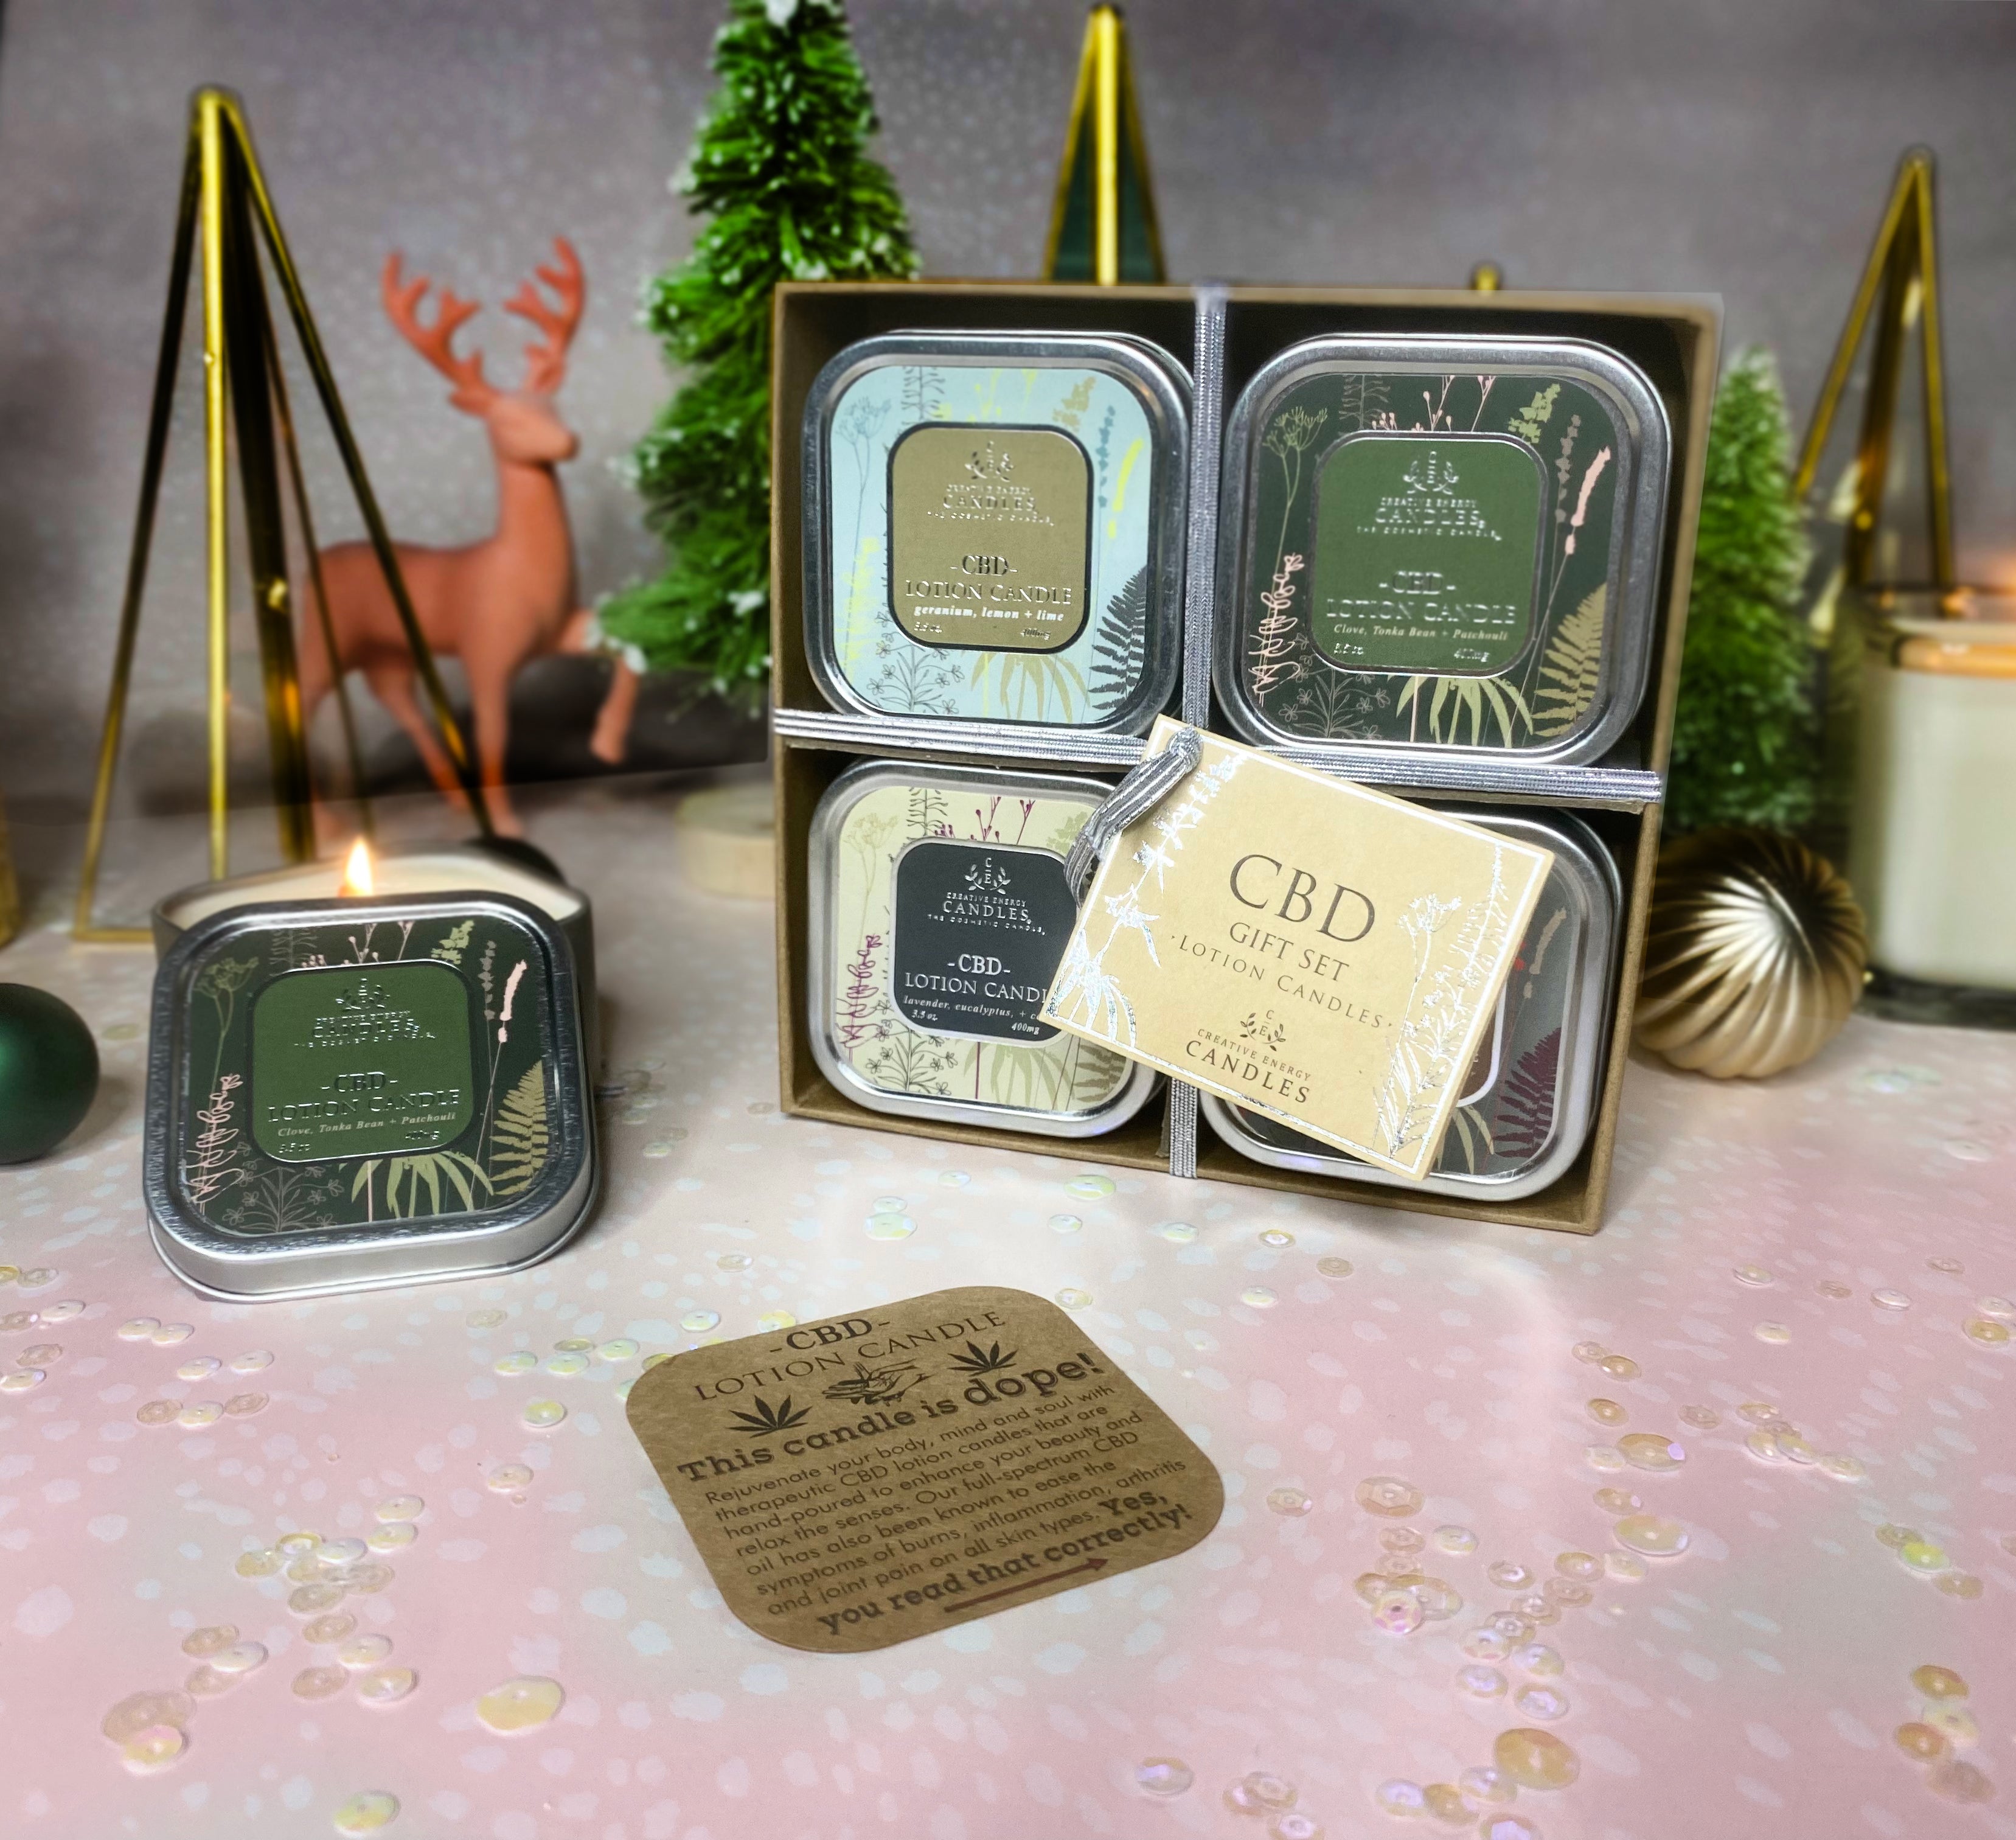 CBD Gift Set | 2-in-1 Soy Lotion Candles